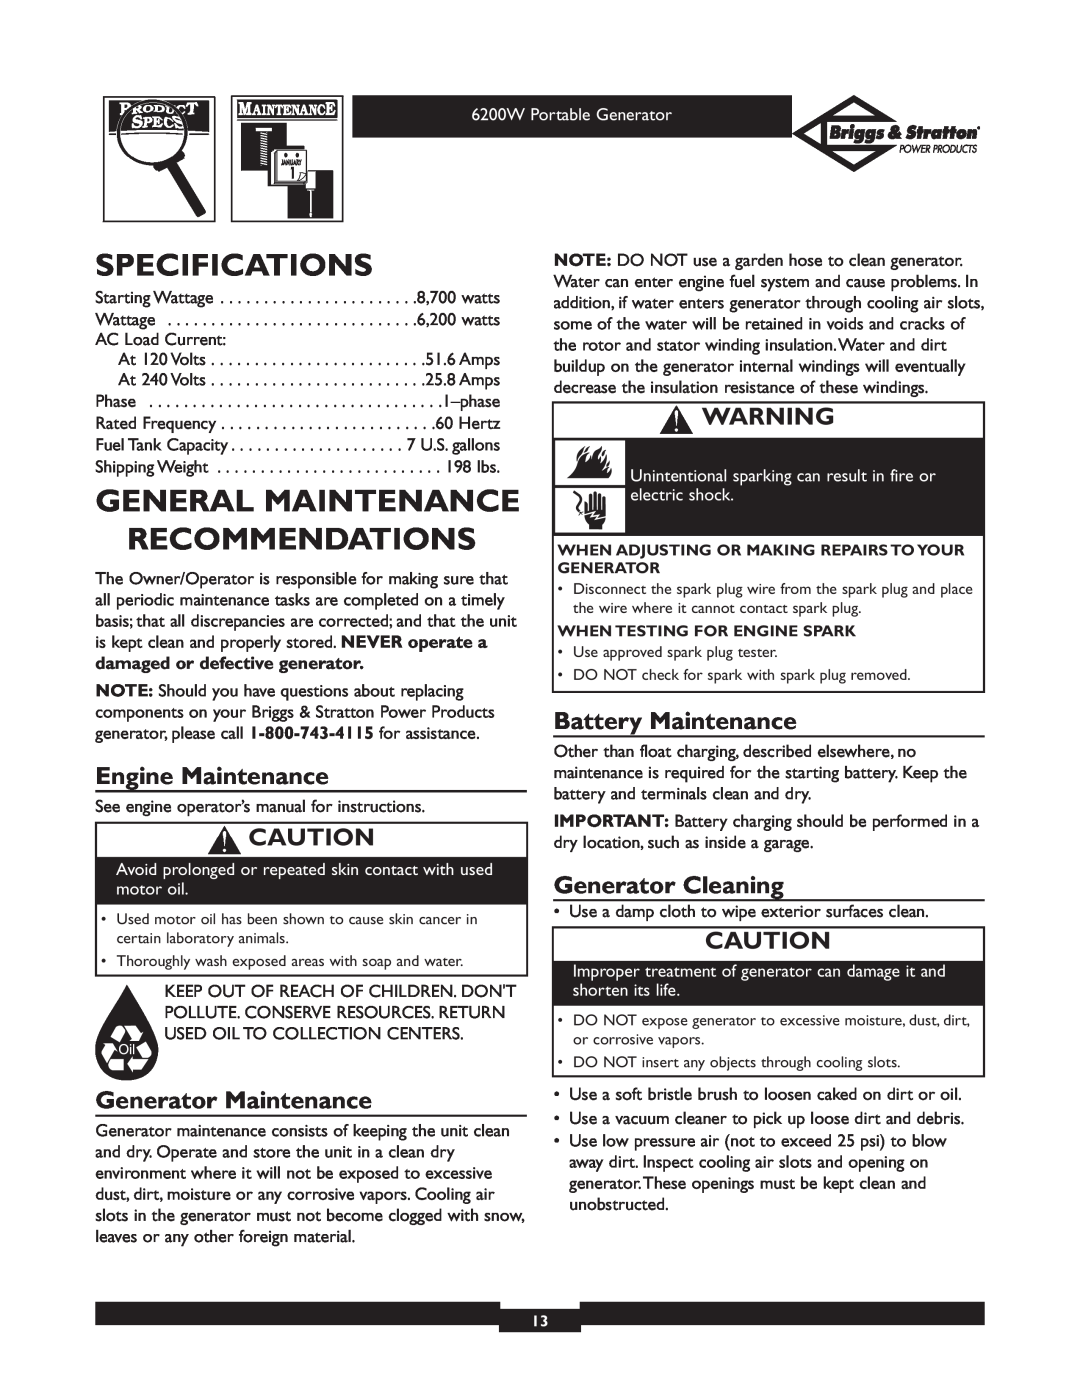 Briggs & Stratton 30211 Specifications, General Maintenance Recommendations, Engine Maintenance, Battery Maintenance 